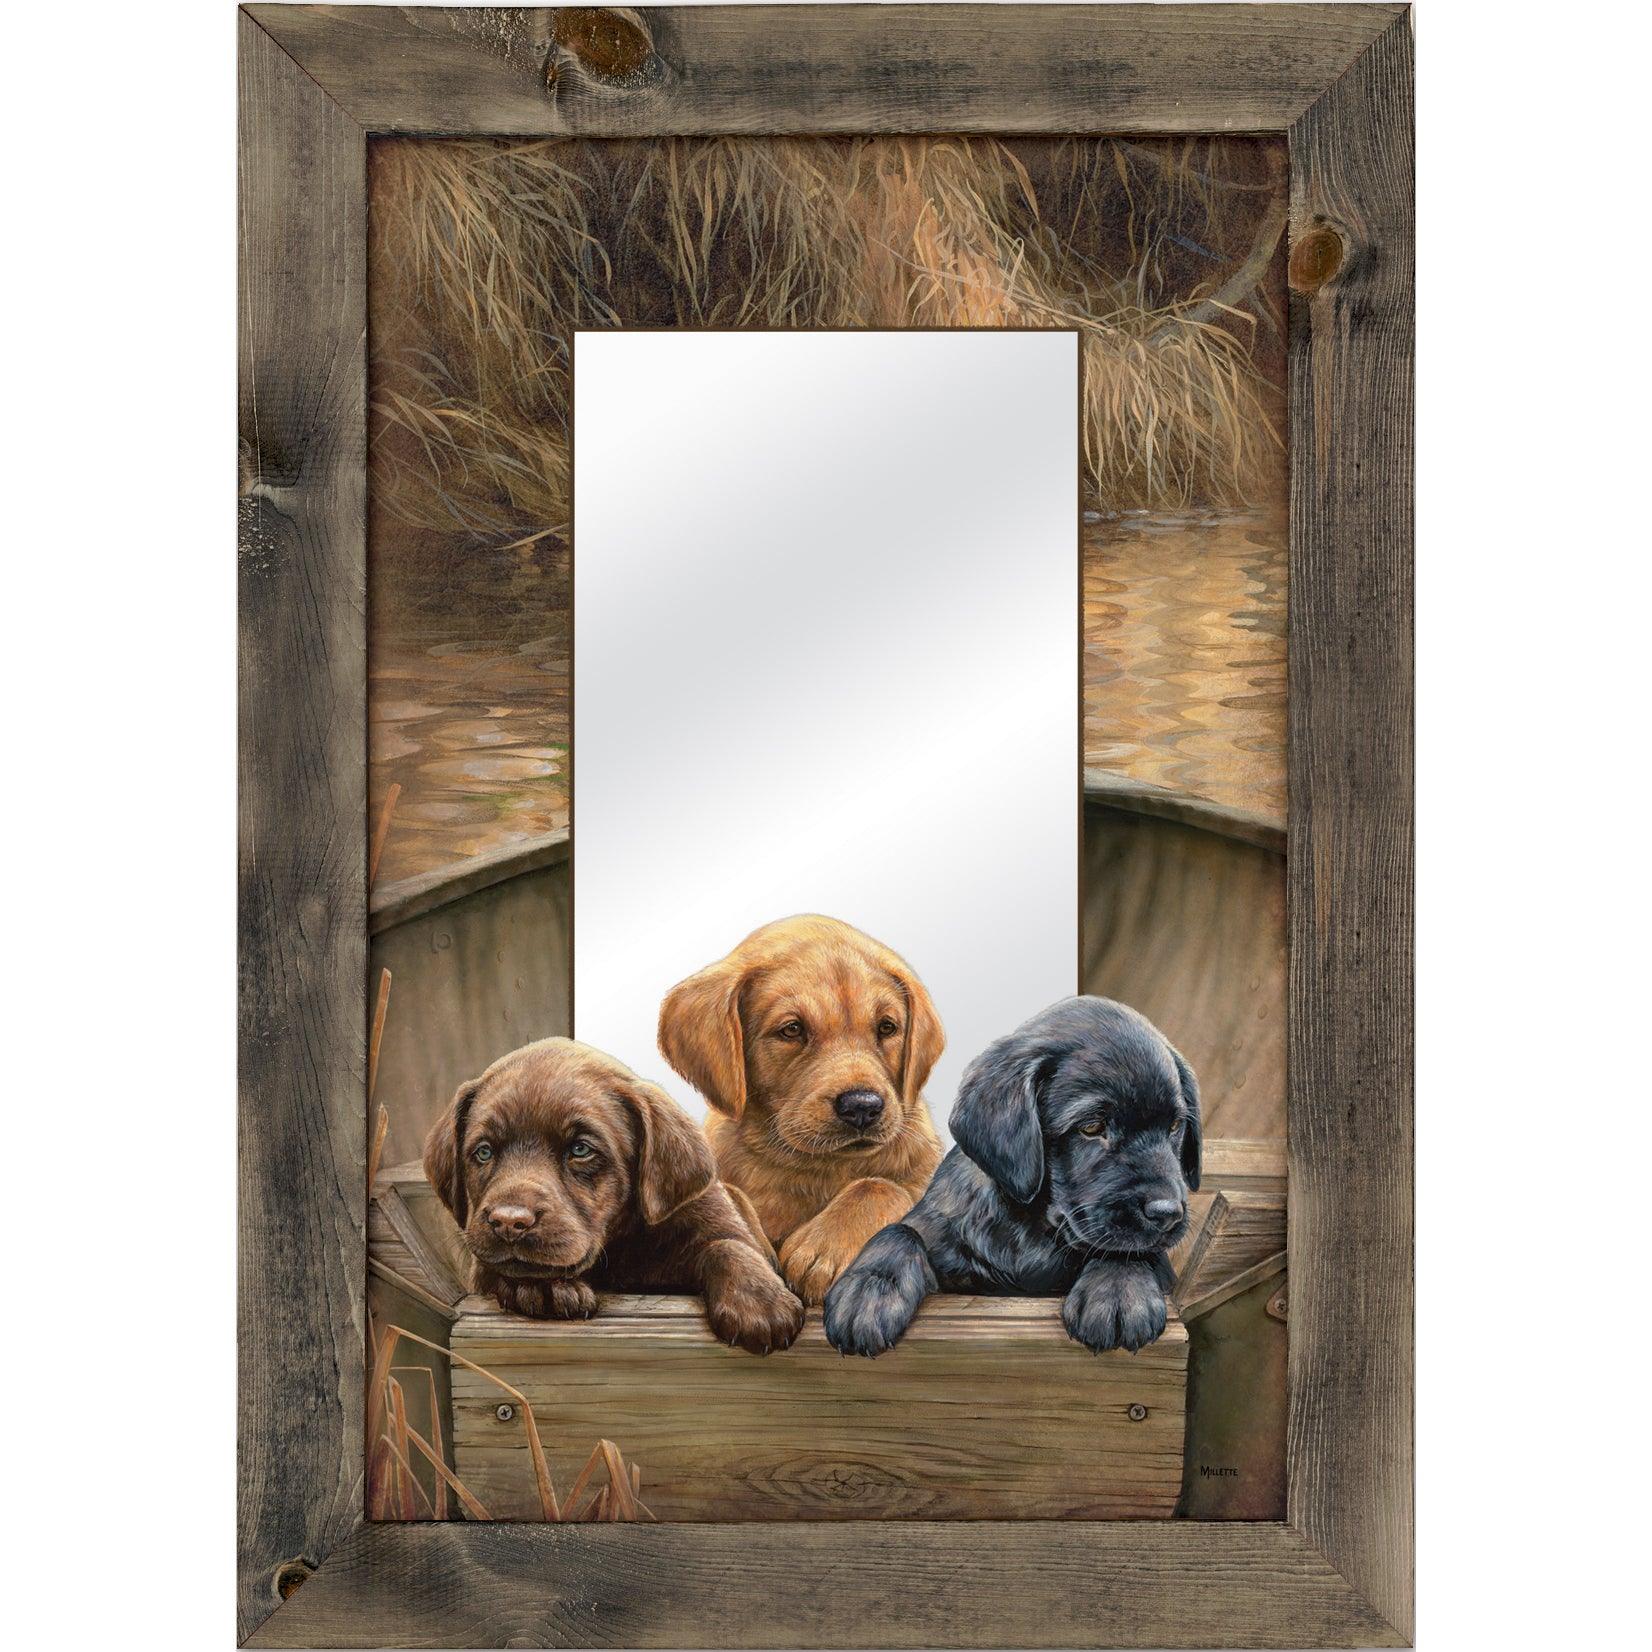 All Hands on Deck - Lab Puppies Large Decorative Mirror - Wild Wings